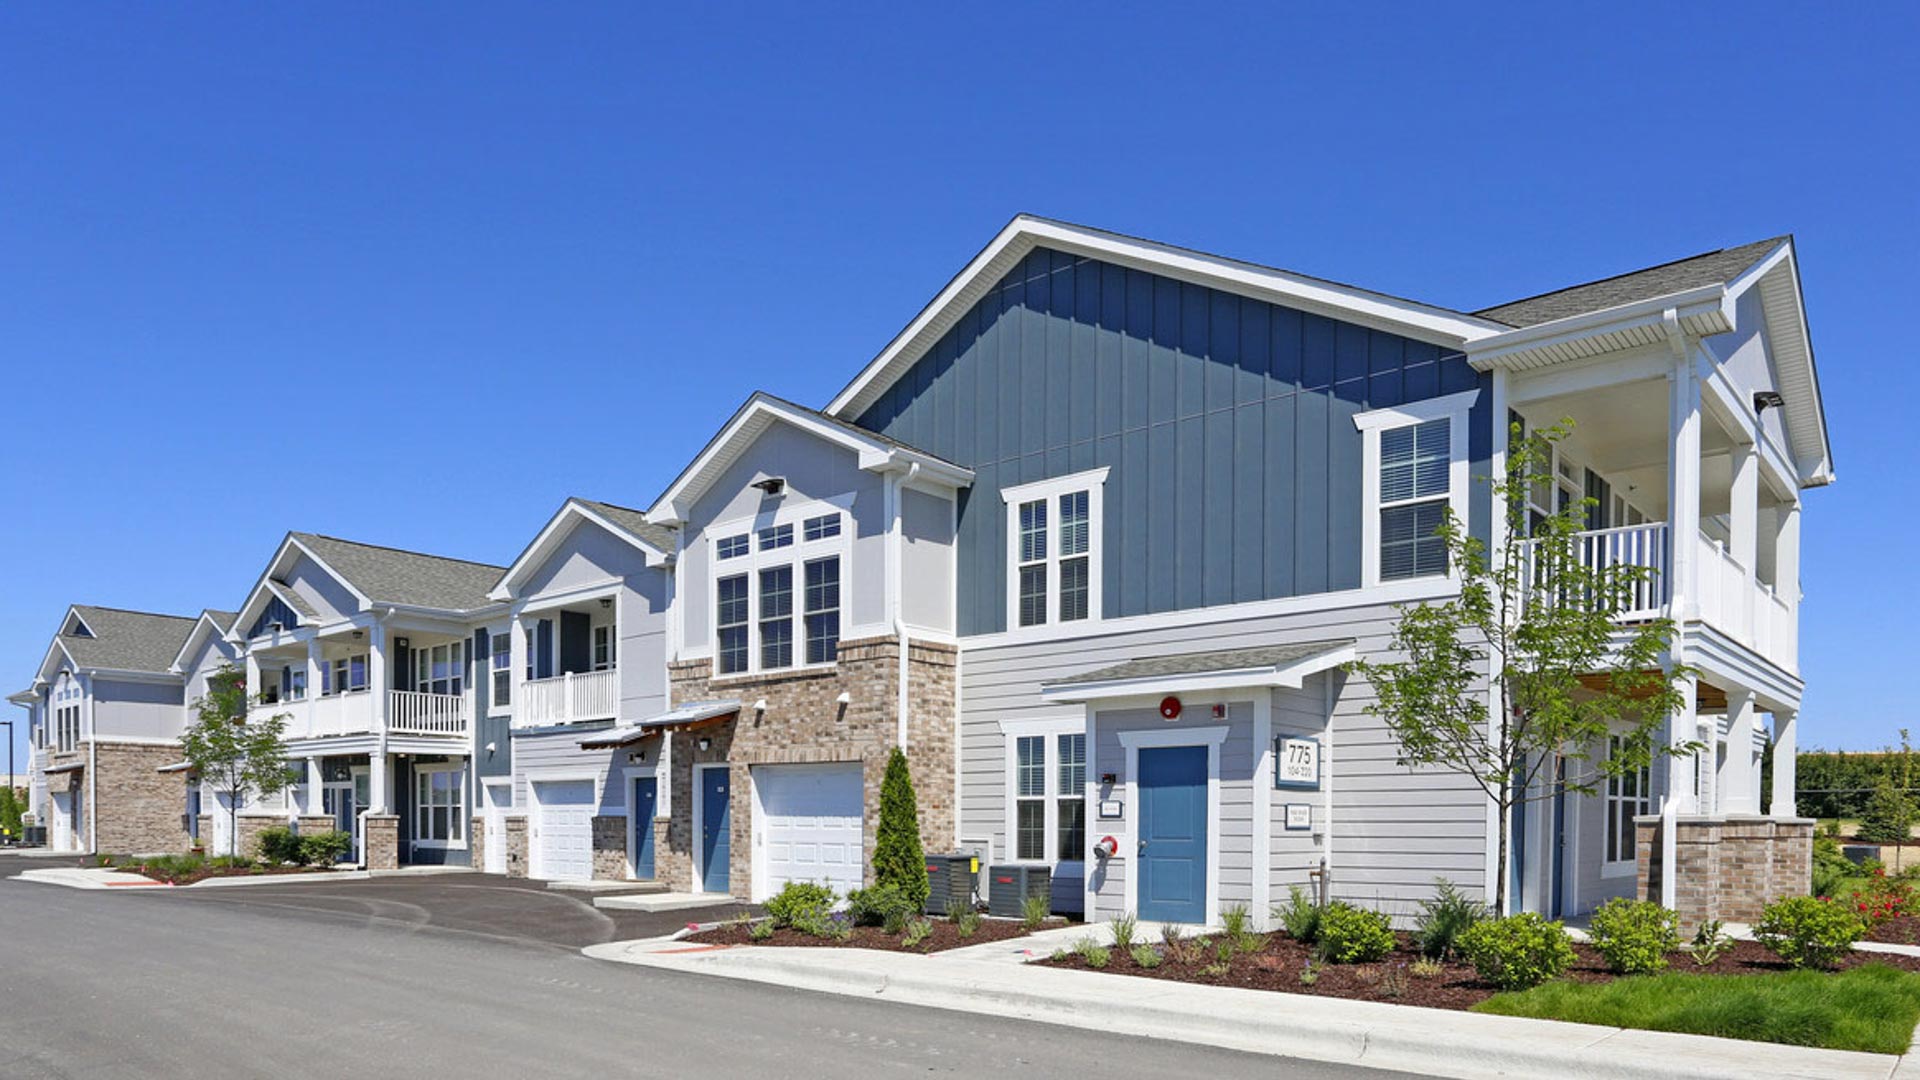 Townhome Exterior at Springs at Oswego Apartments in Oswego, IL-2